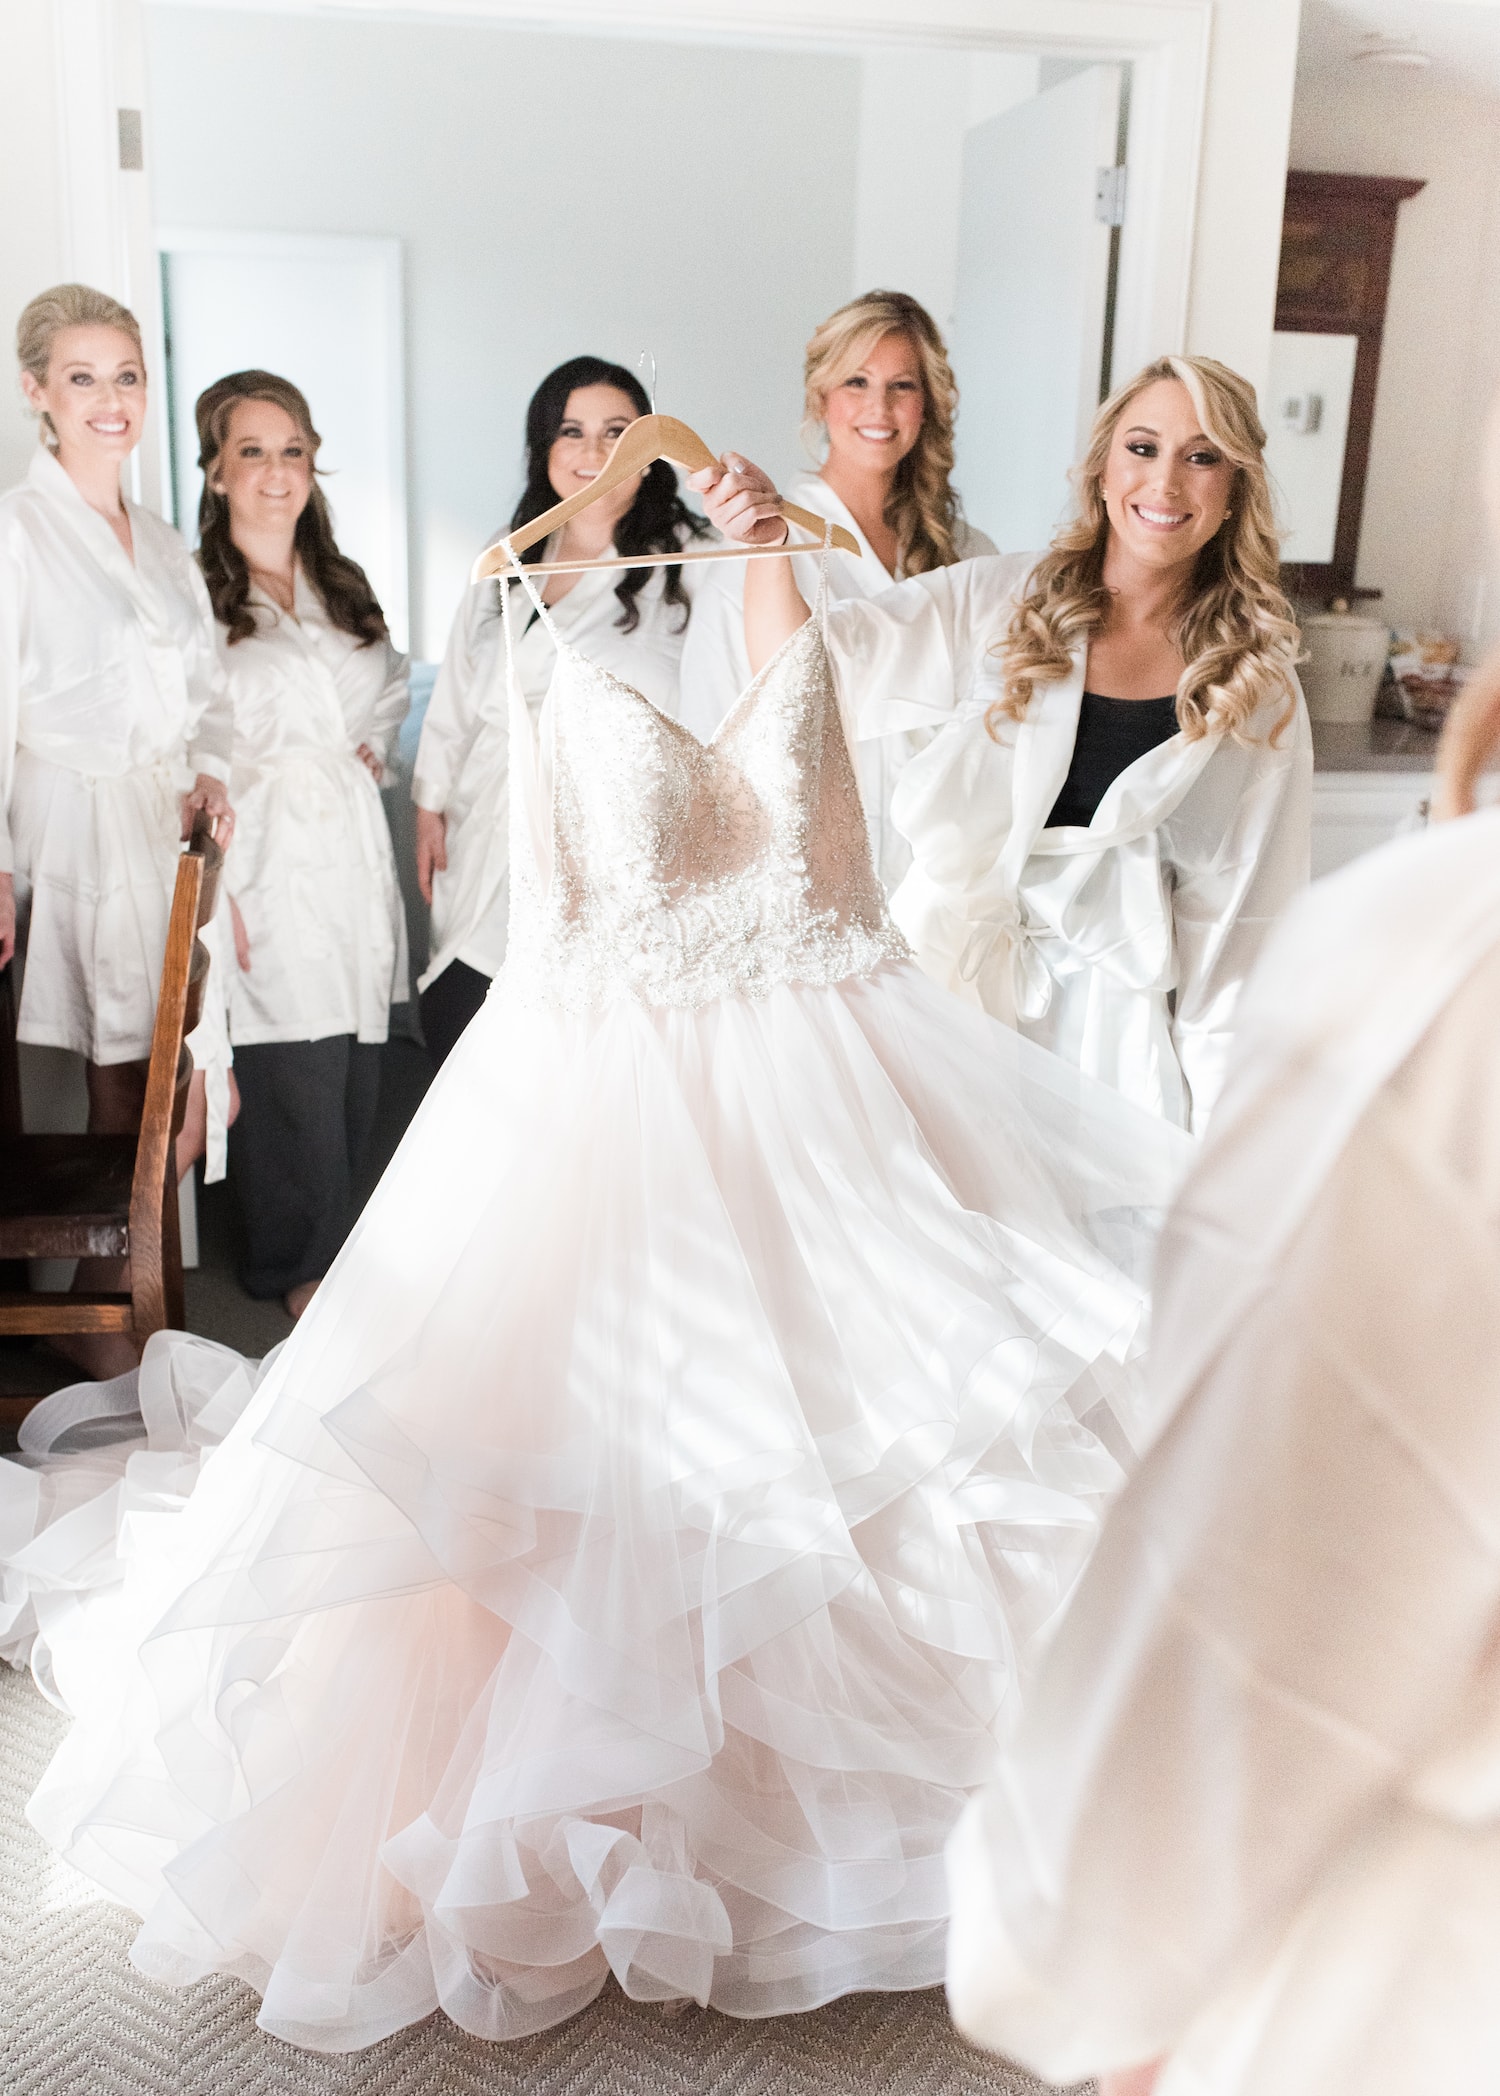 A bride holds up her dress during a group get-ready, a popular wedding tradition. Image by Massachusetts wedding photographer Marcela Plosker.